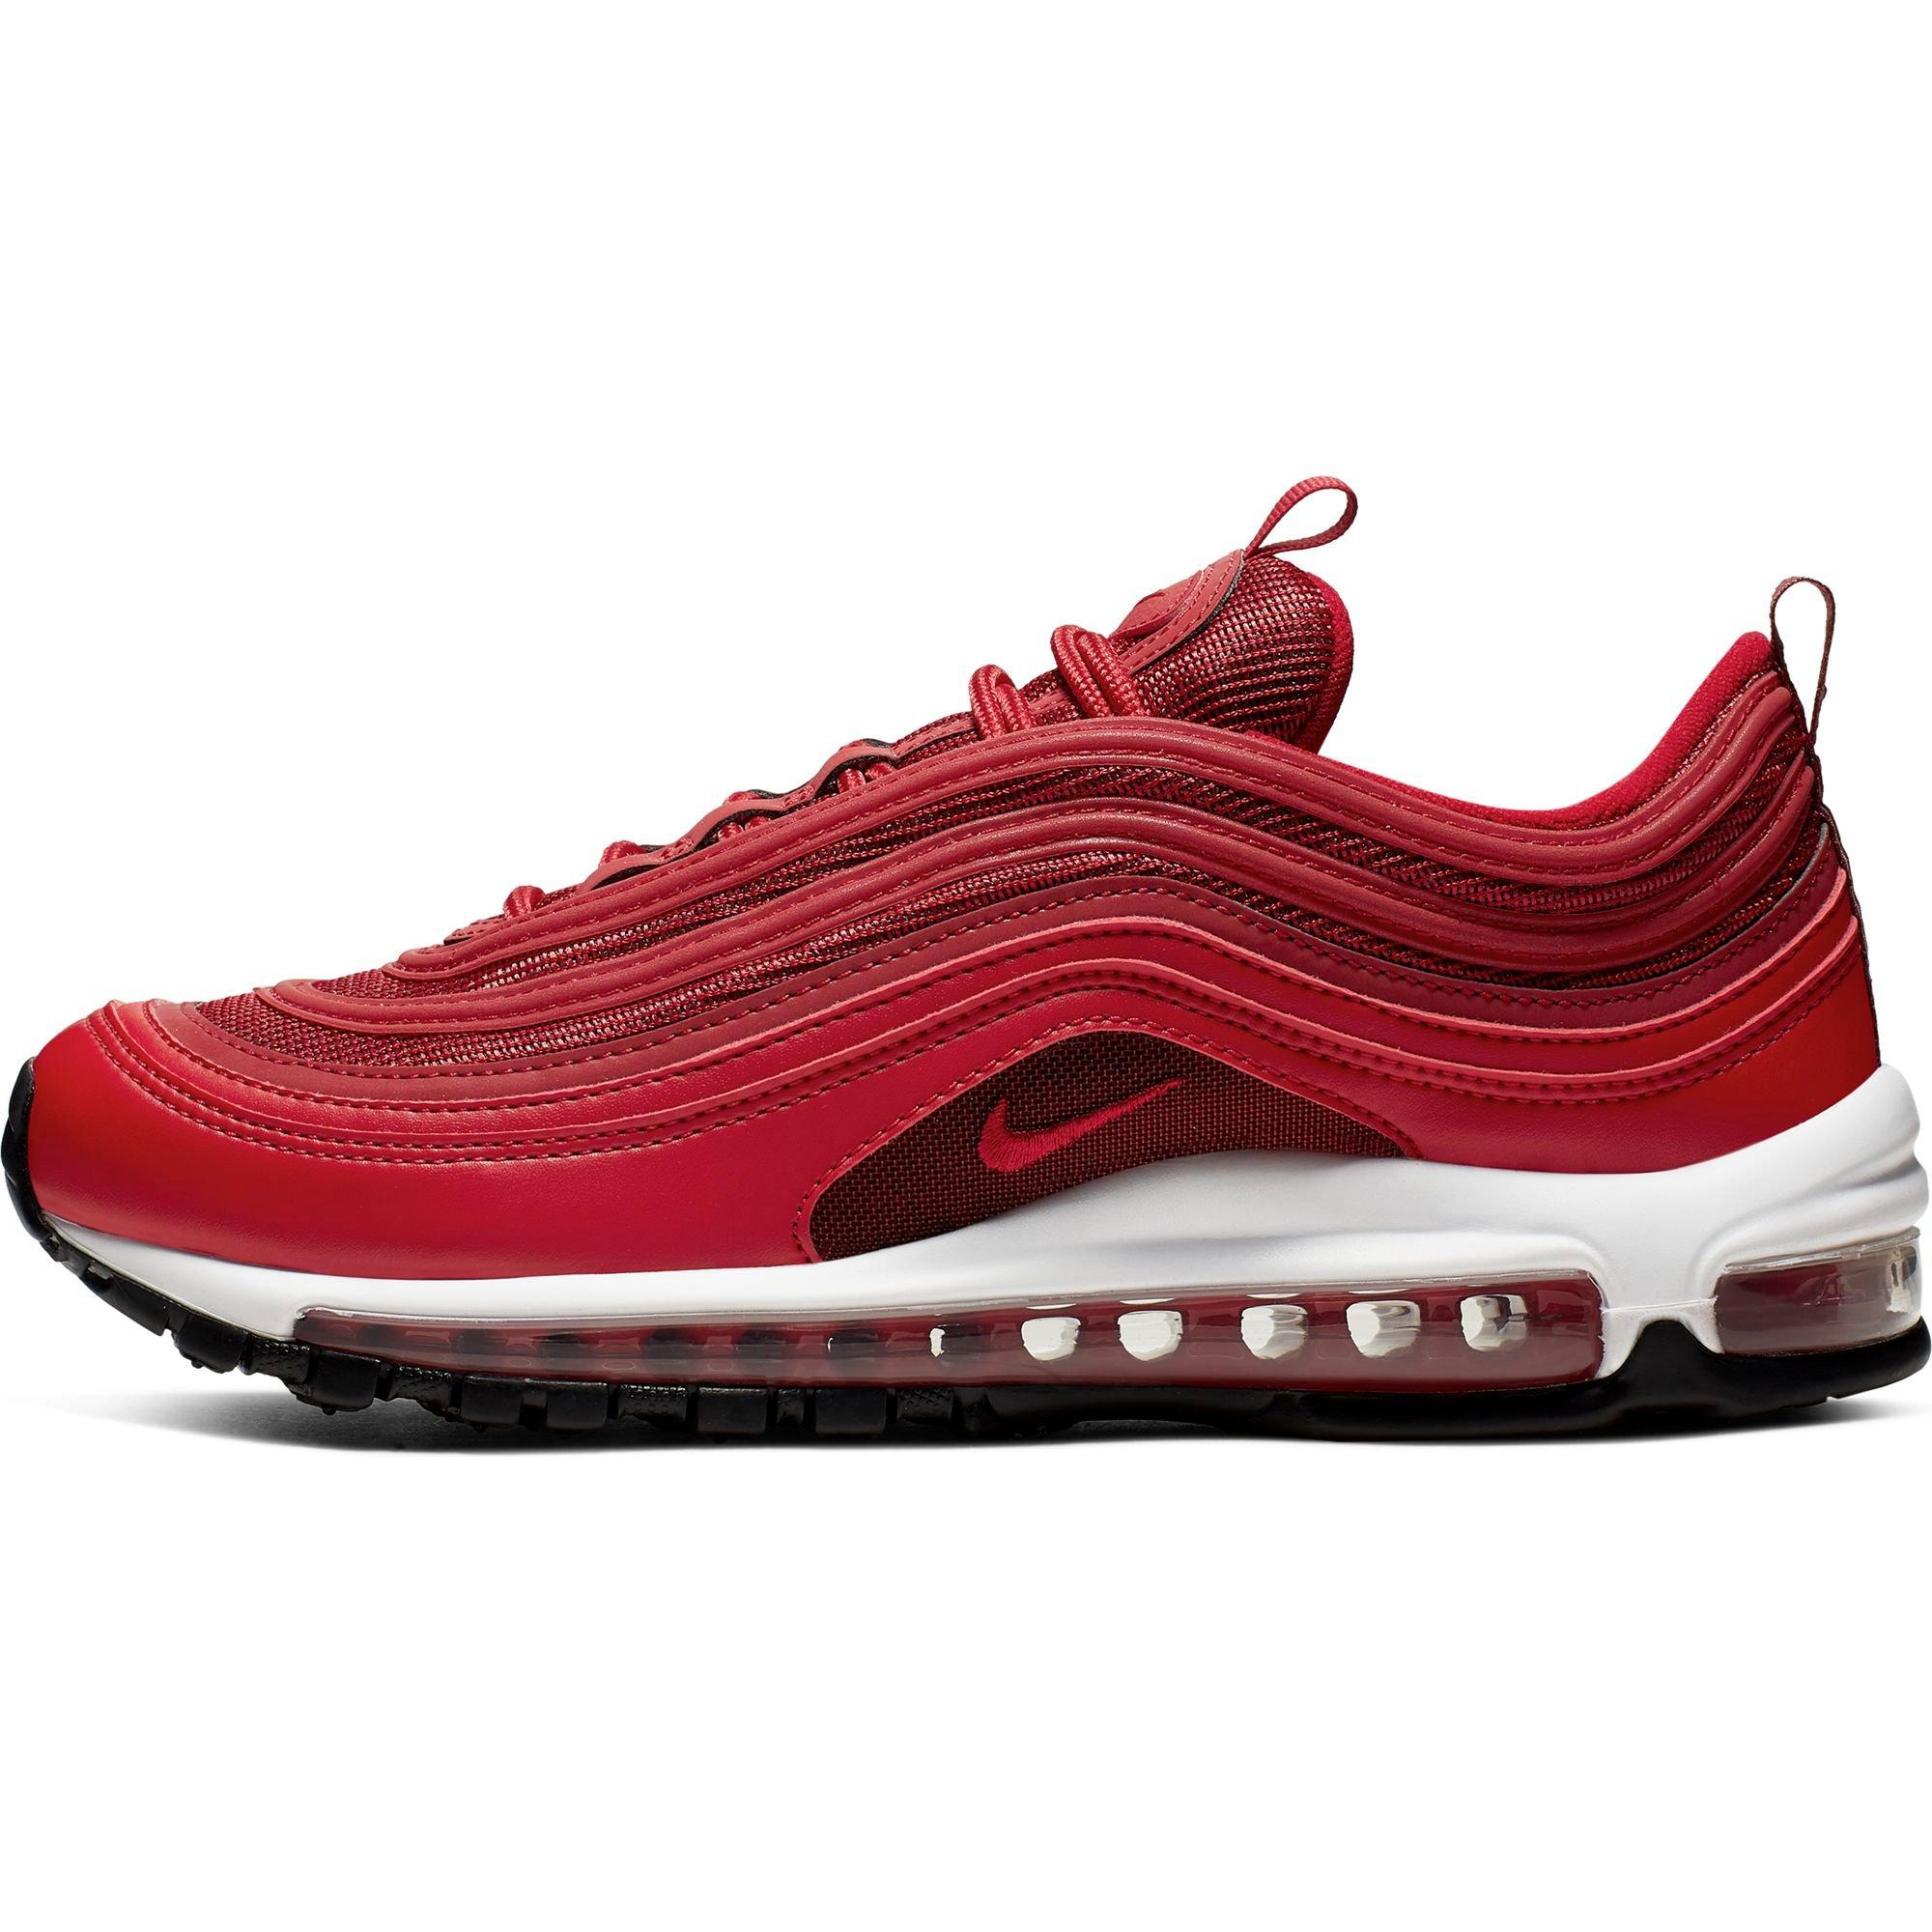 red 97's